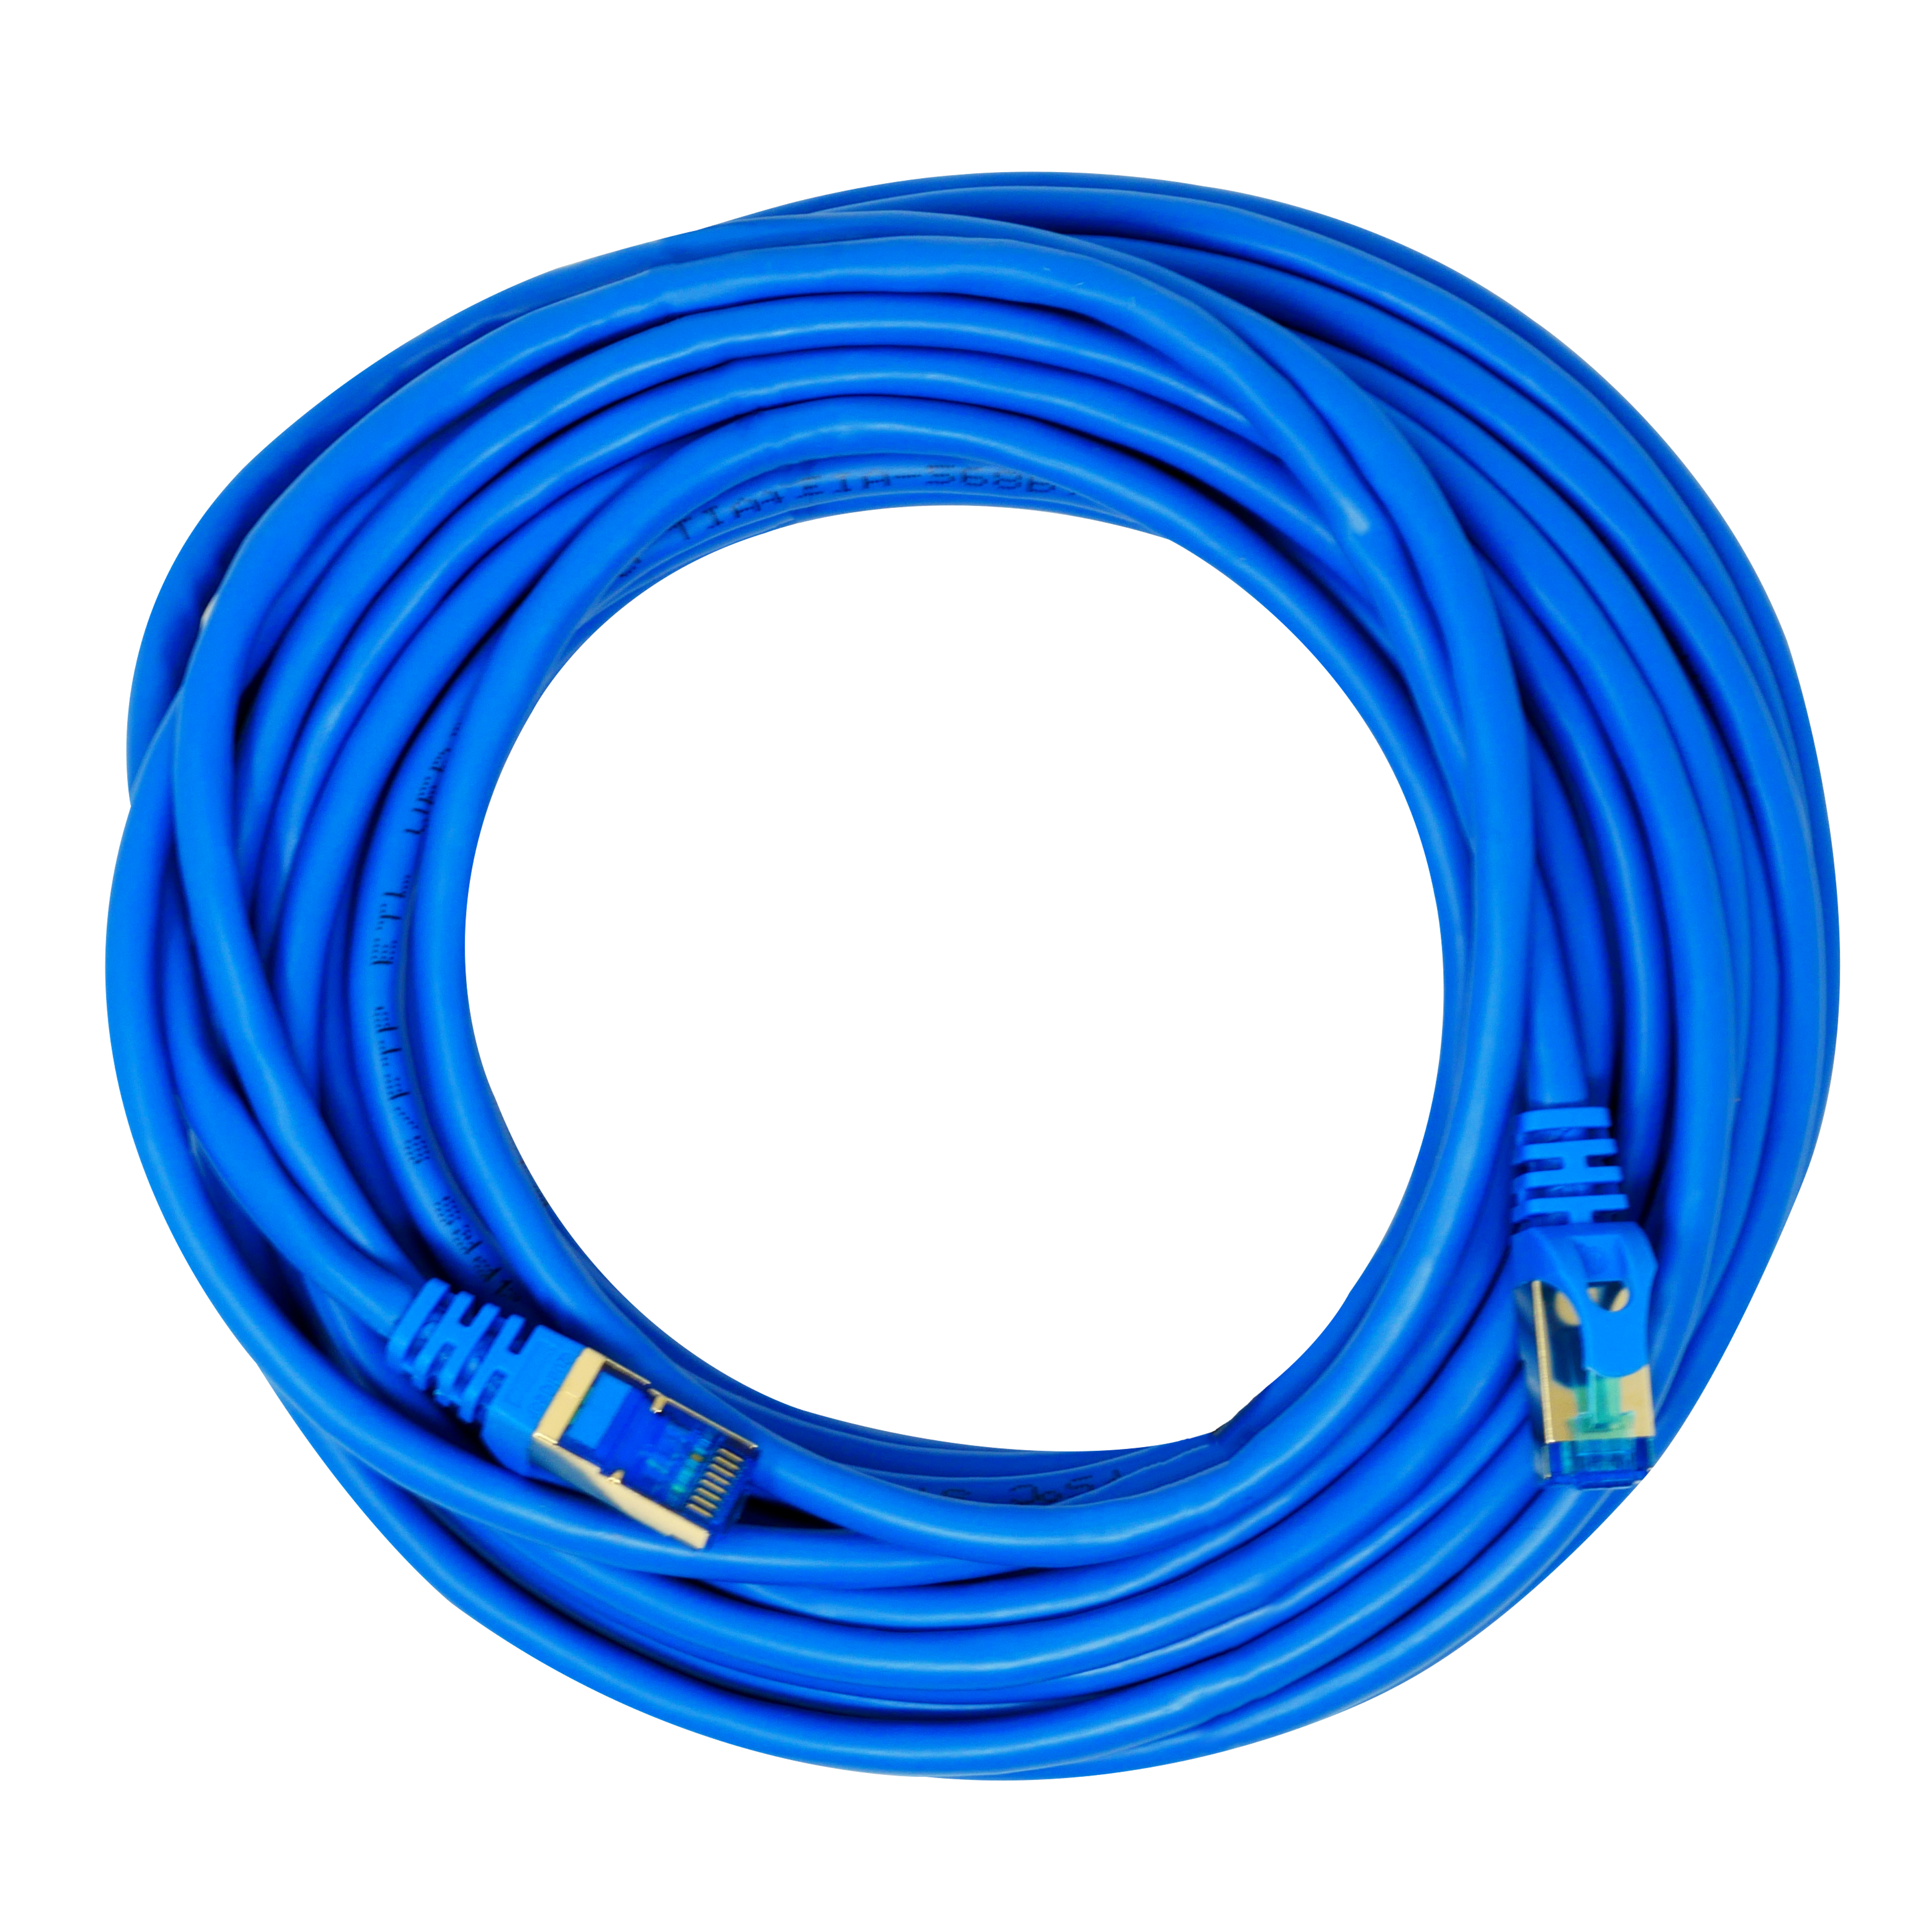 QualGear QG-CAT7R-50FT-BLU CAT 7 S/FTP Ethernet Cable Length 50 feet - 26 AWG, 10 Gbps, Gold Plated Contacts, RJ45, 99.99% OFC Copper, Color Blue 